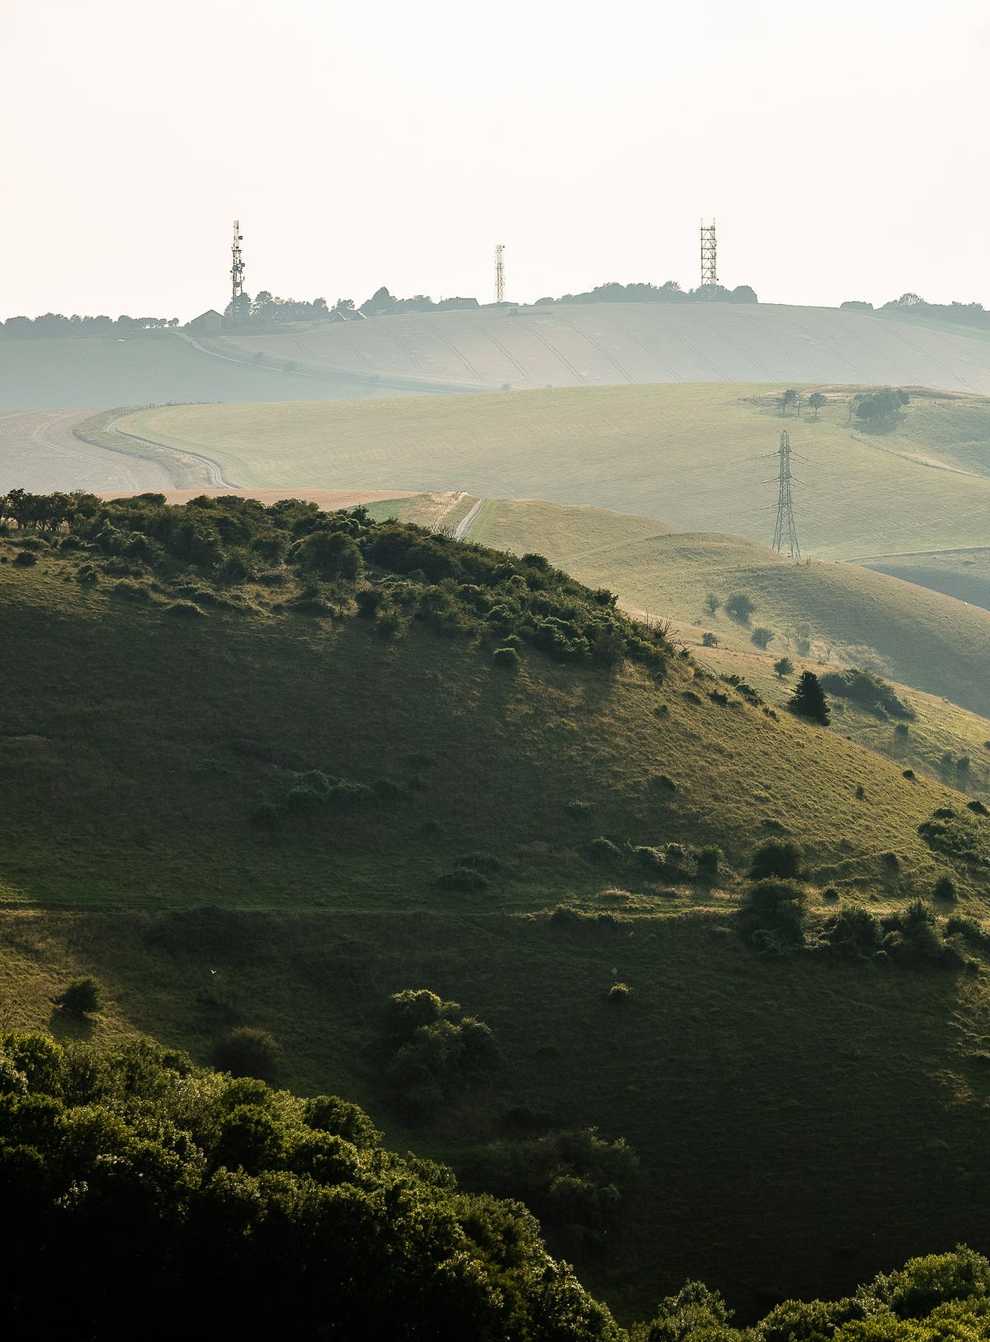 Managers of the South Downs National Park have identified 23,000 hectares of land for new woodland which could have ‘huge’ potential to help fight climate change (National Trust/PA)